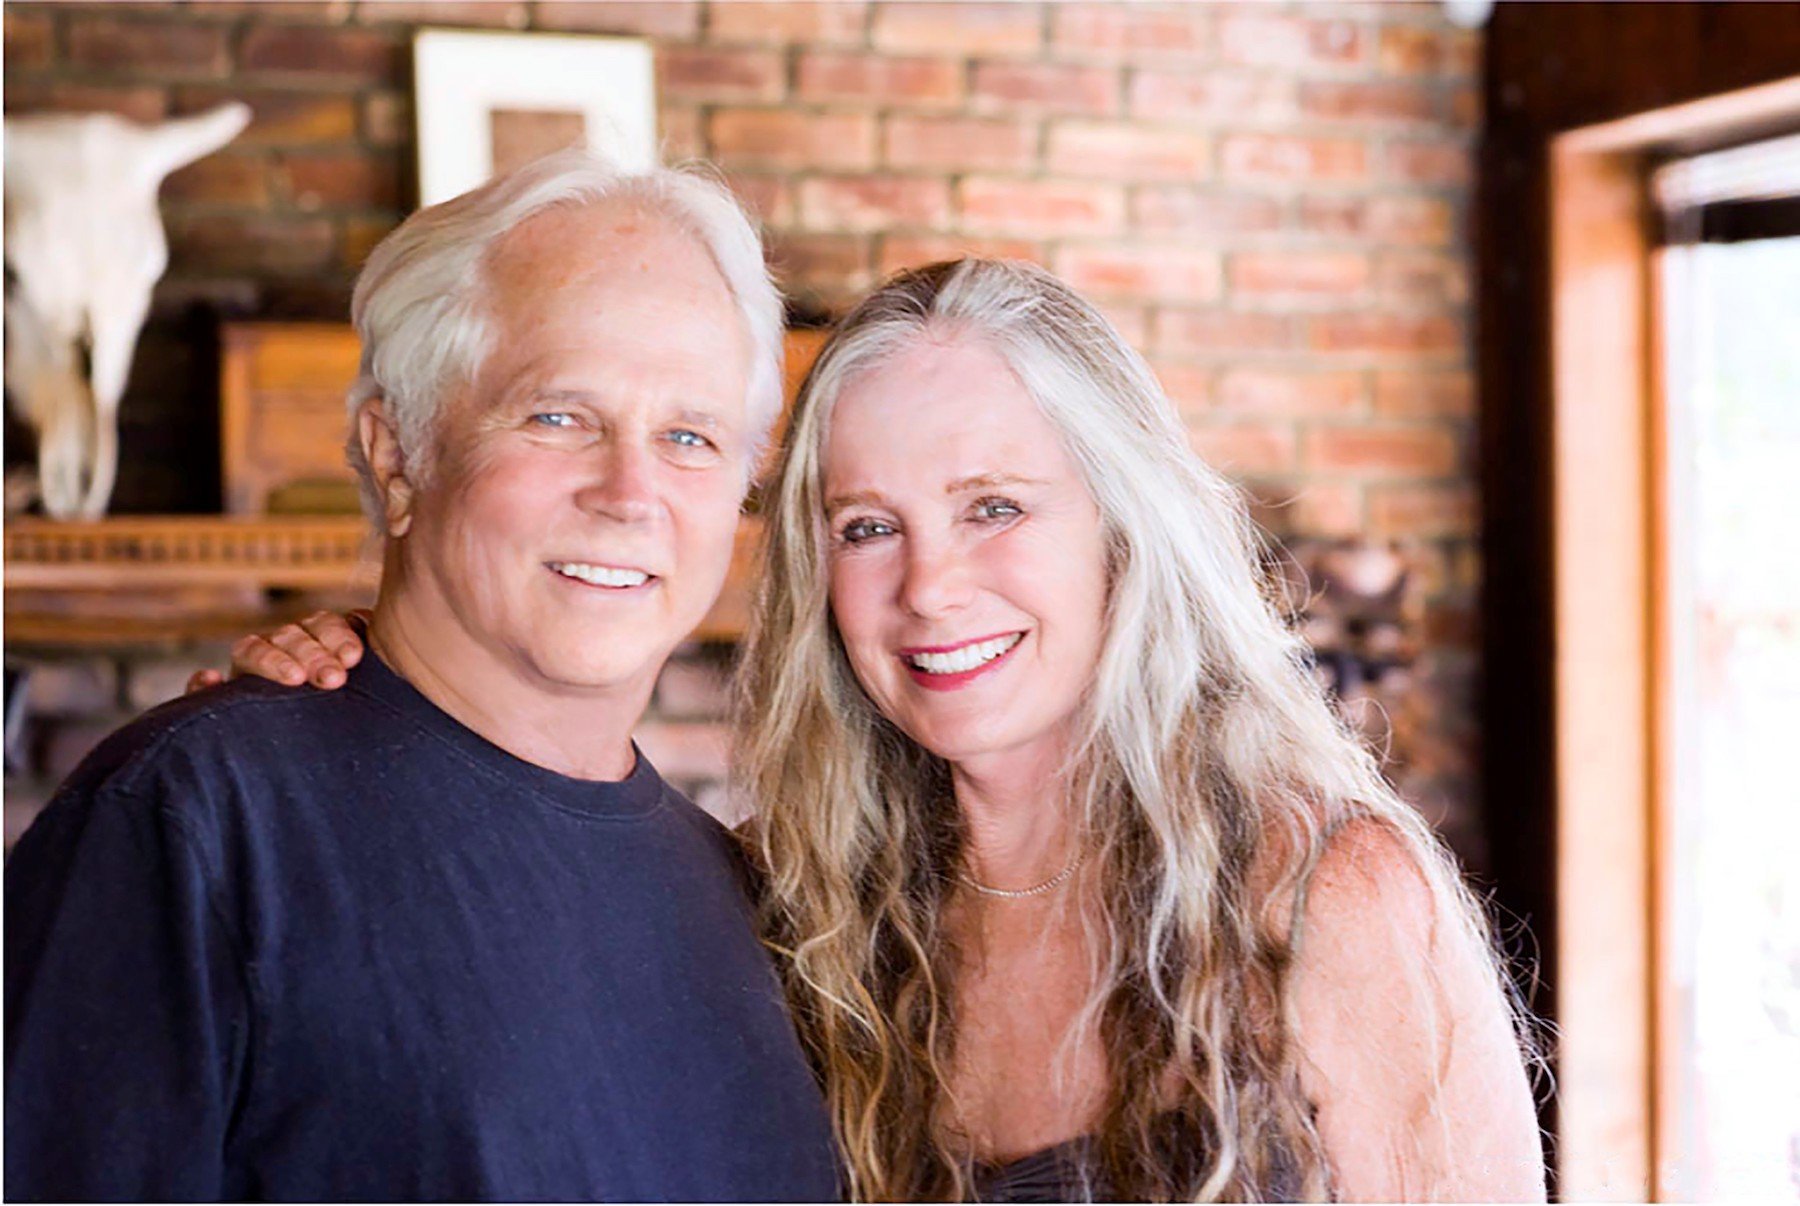 Tony Dow smiling with wife Lauren Shulkind